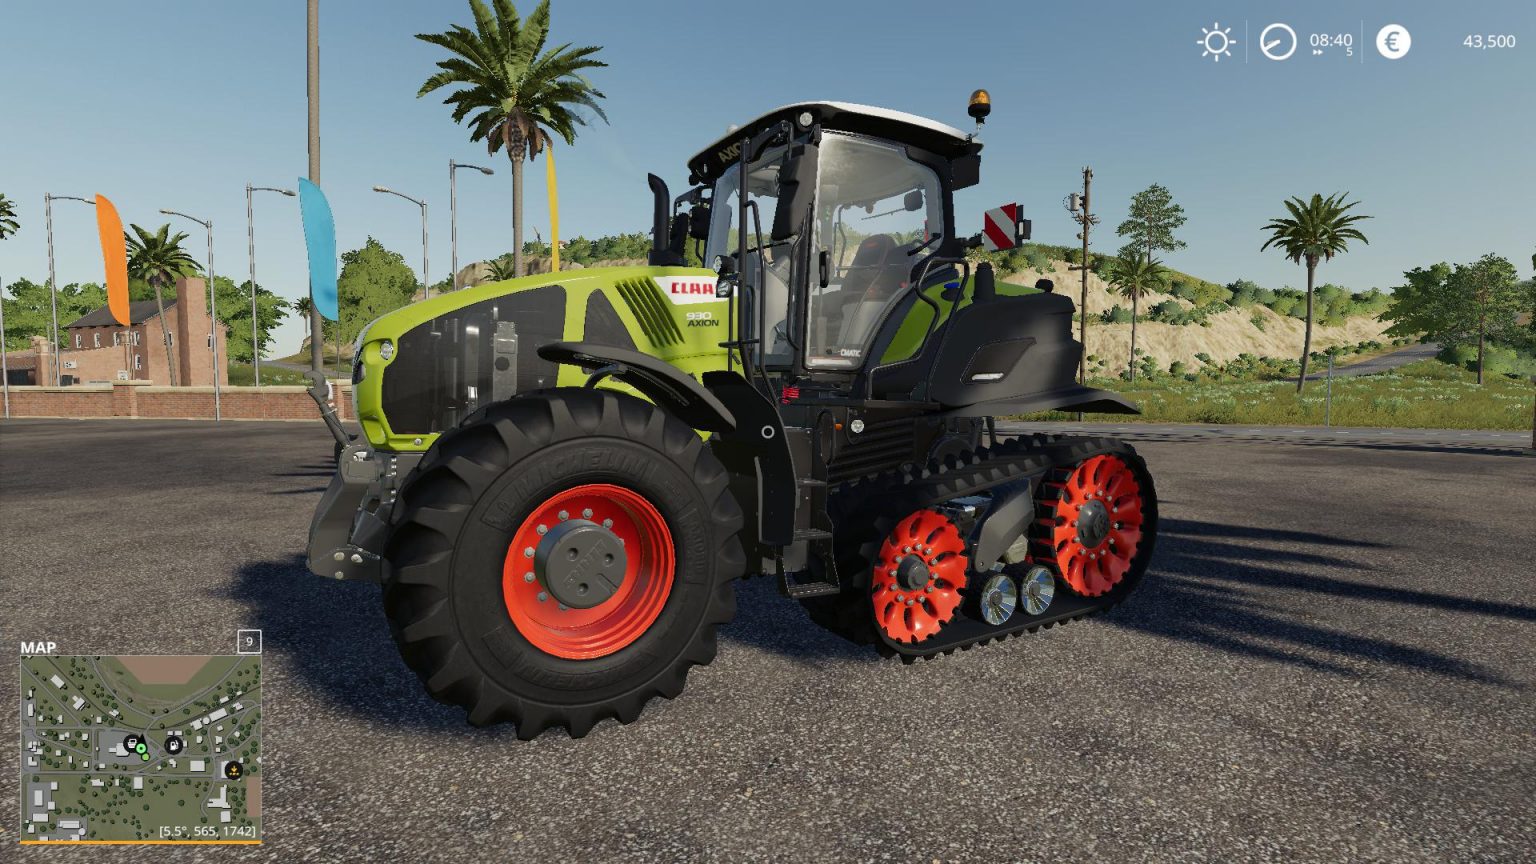 Ls2019 Claas Axion 900 V1002 Farming Simulator 22 Mod Ls22 Mod Images And Photos Finder 4860